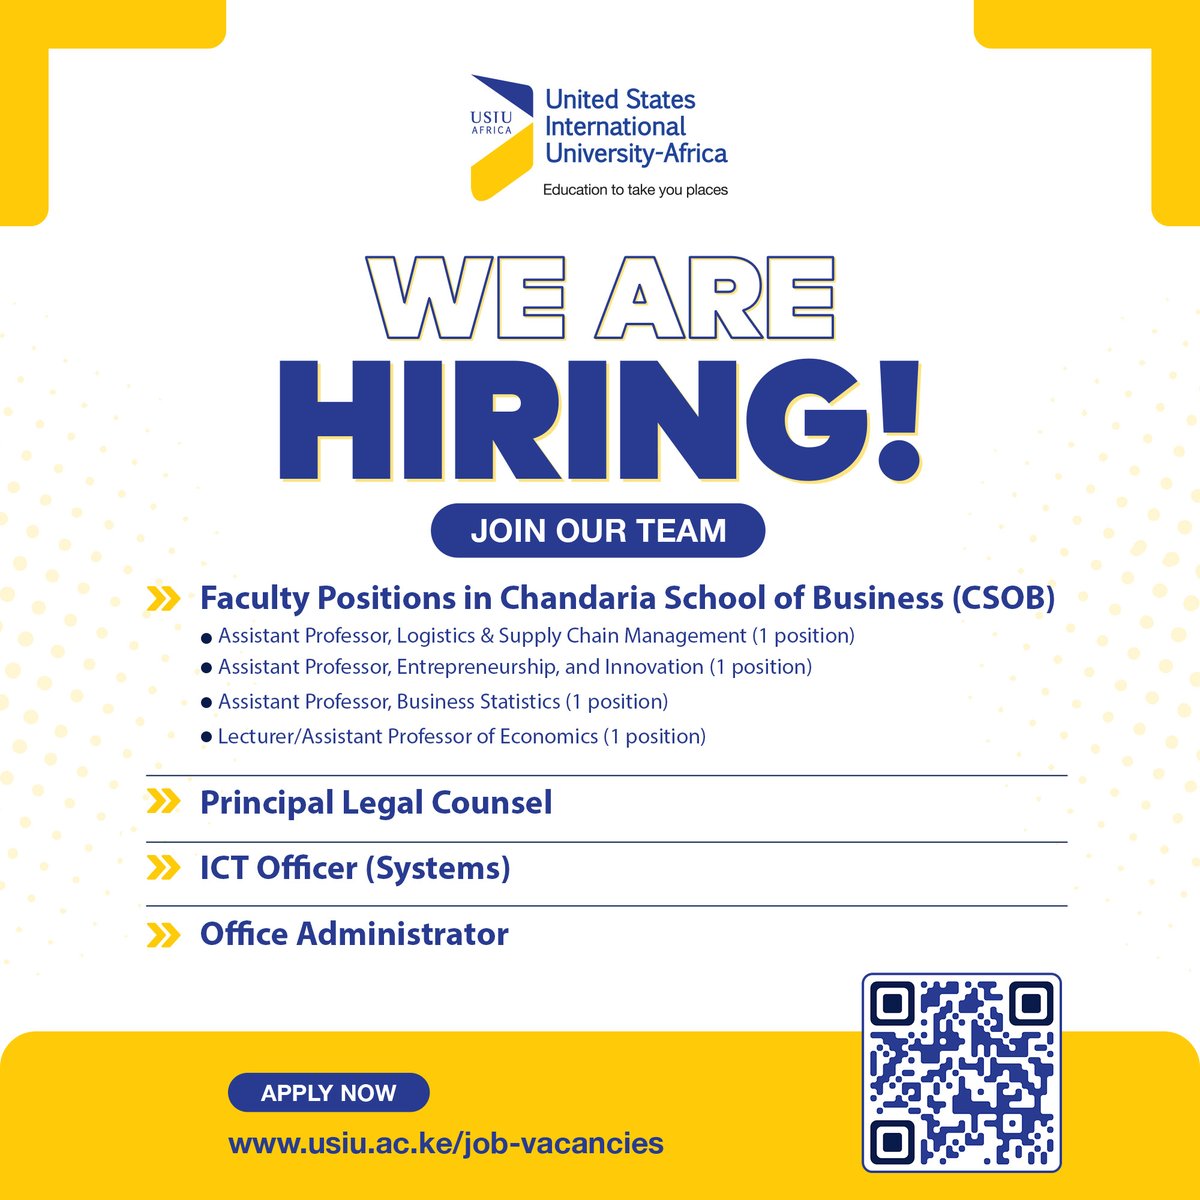 JOB VACANCY ANNOUNCEMENT! USIU-Africa is seeking to recruit suitable and qualified candidates for the following positions: * Faculty Positions in Chandaria School of Business * Principal Legal Counsel * ICT Officer (Systems) * Office Administrator For more details on the